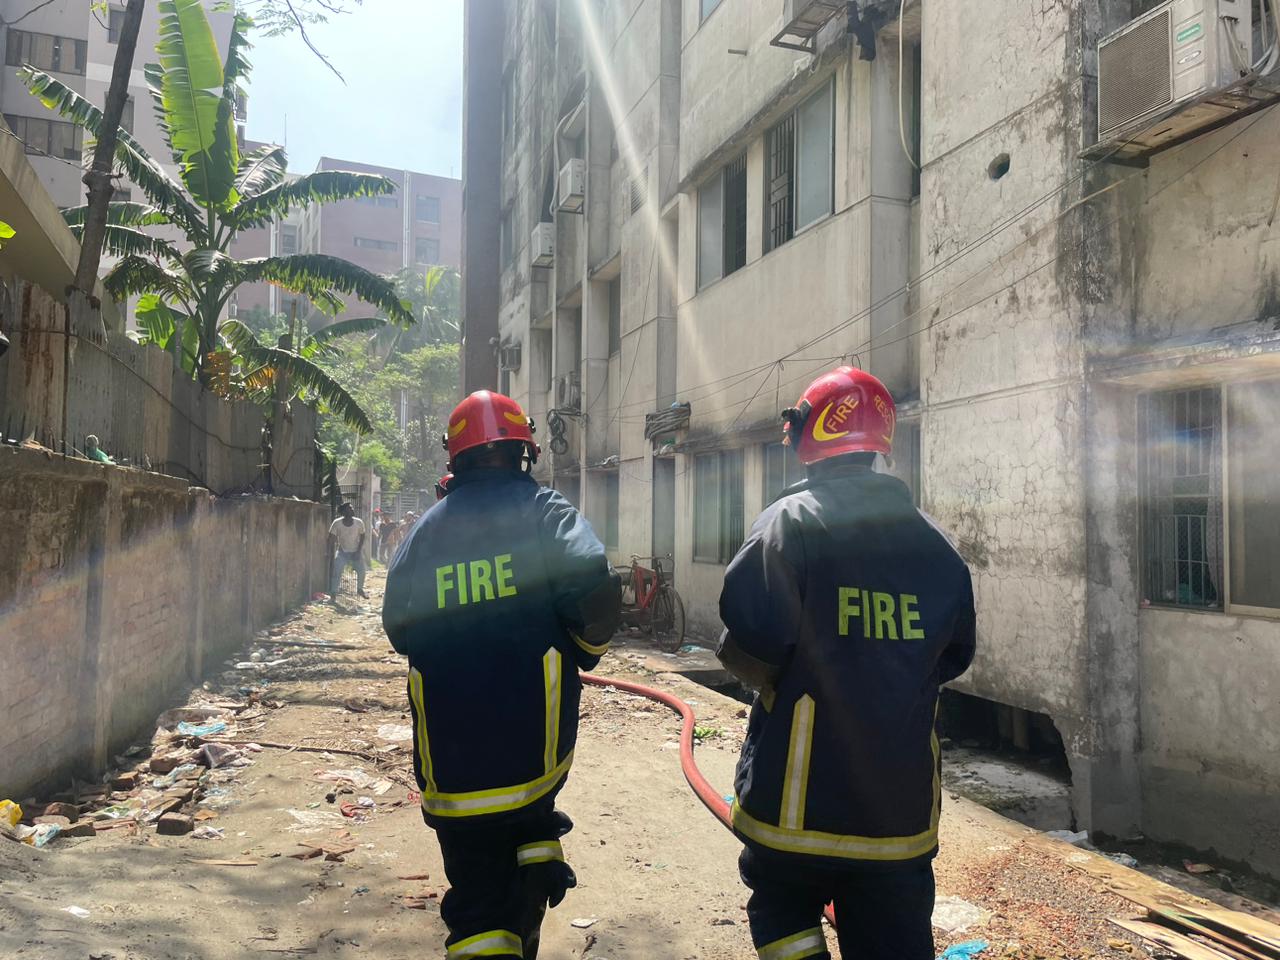 Fire breaks out at Dhaka Shishu Hospital, firefighters trying to douse